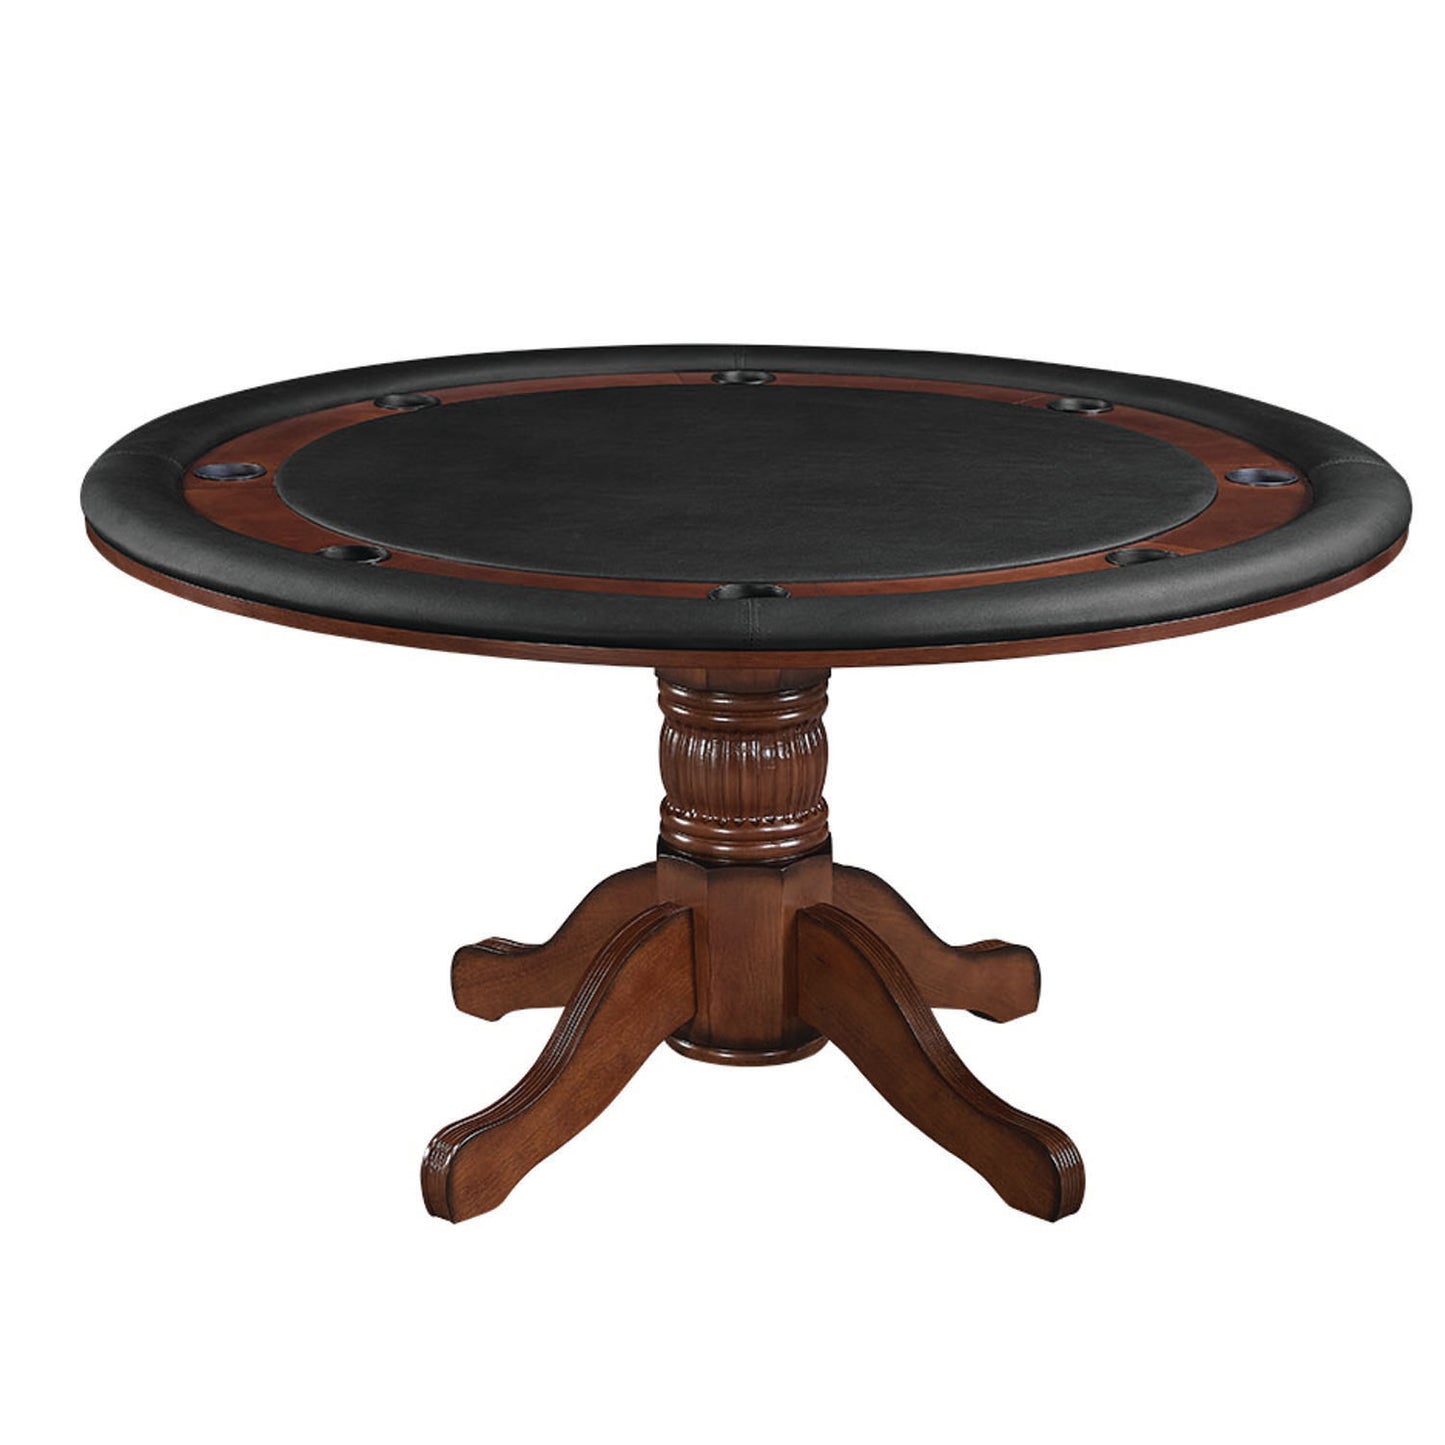 60" reversible round game table with vinyl padded game surface in a chestnut finish.